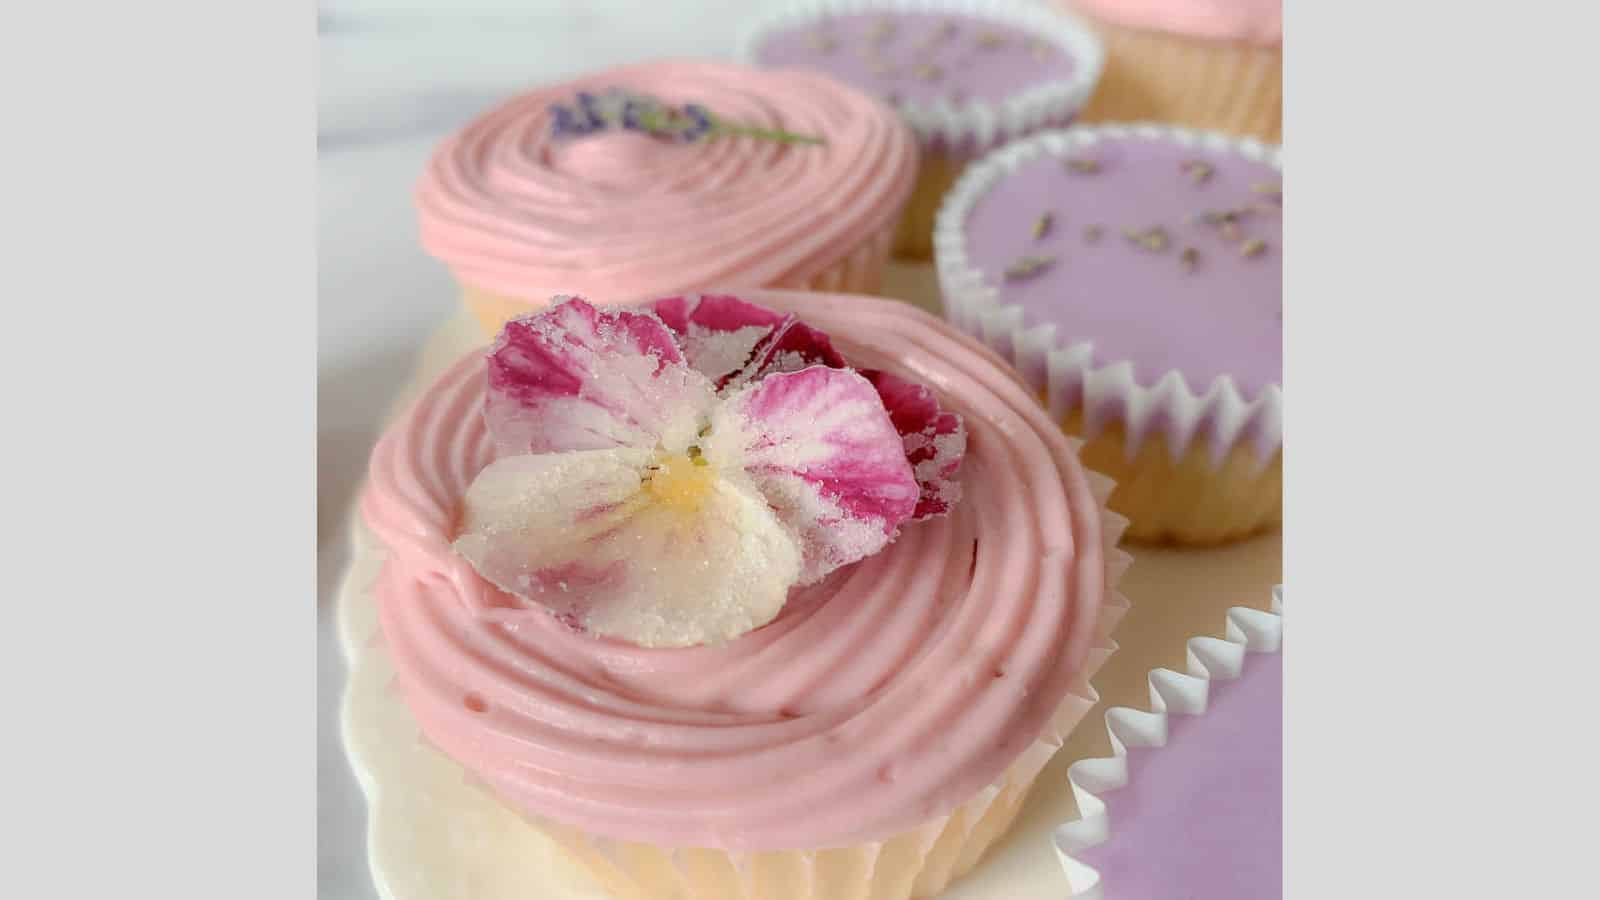 Cupcakes adorned with a swirly frosting and sugared, edible flowers.